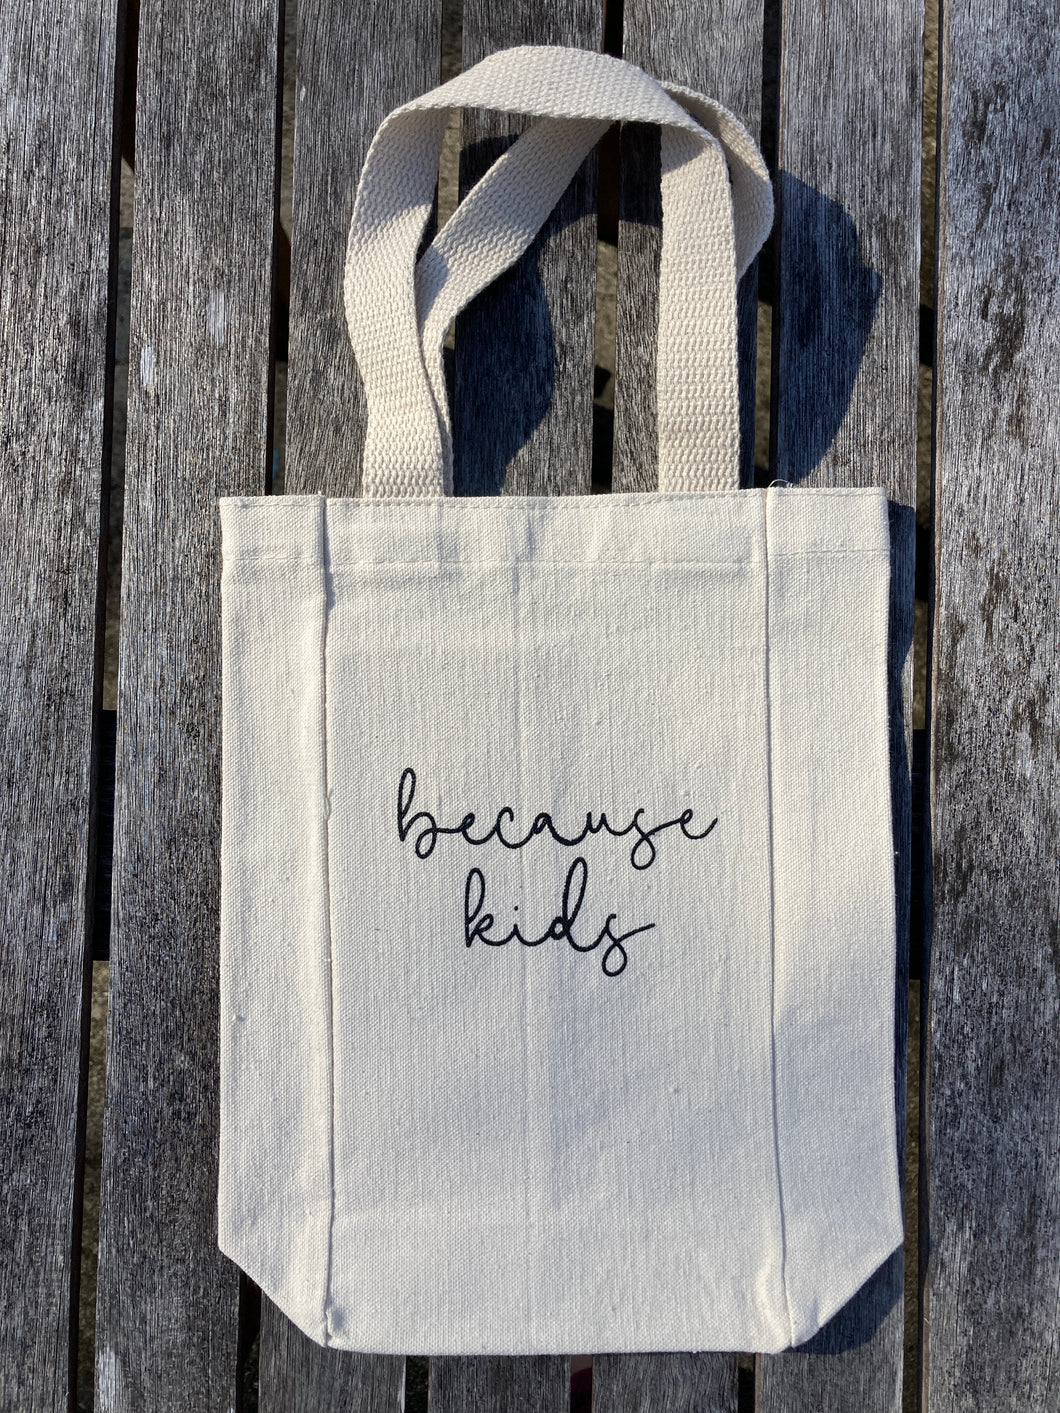 Because Kids Double Bottle Canvas Tote